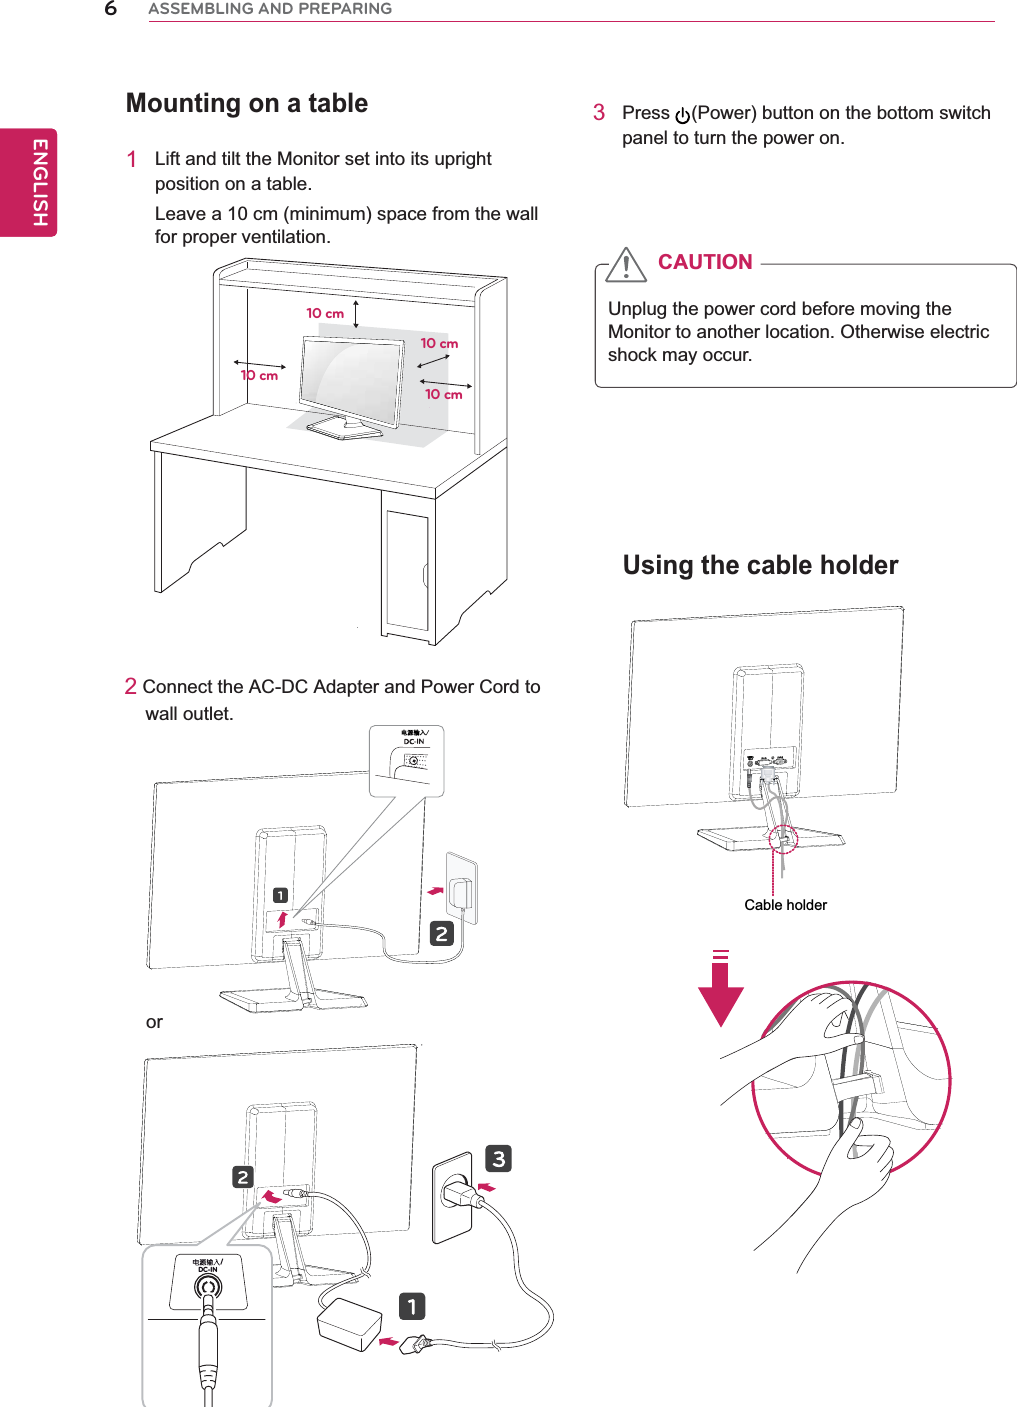 Mounting on a table1Lift and tilt the Monitor set into its upright position on a table.Leave a 10 cm (minimum) space from the wall for proper ventilation.2 Connect the AC-DC Adapter and Power Cord to     wall outlet.3Press (Power) button on the bottom switch panel to turn the power on.Unplug the power cord before moving the Monitor to another location. Otherwise electric shock may occur.CAUTION10 cm10 cm10 cm10 cmUsing the cable holder6ENGENGLISHASSEMBLING AND PREPARING⬉⑤䕧ܹDC-IN /orCable holder